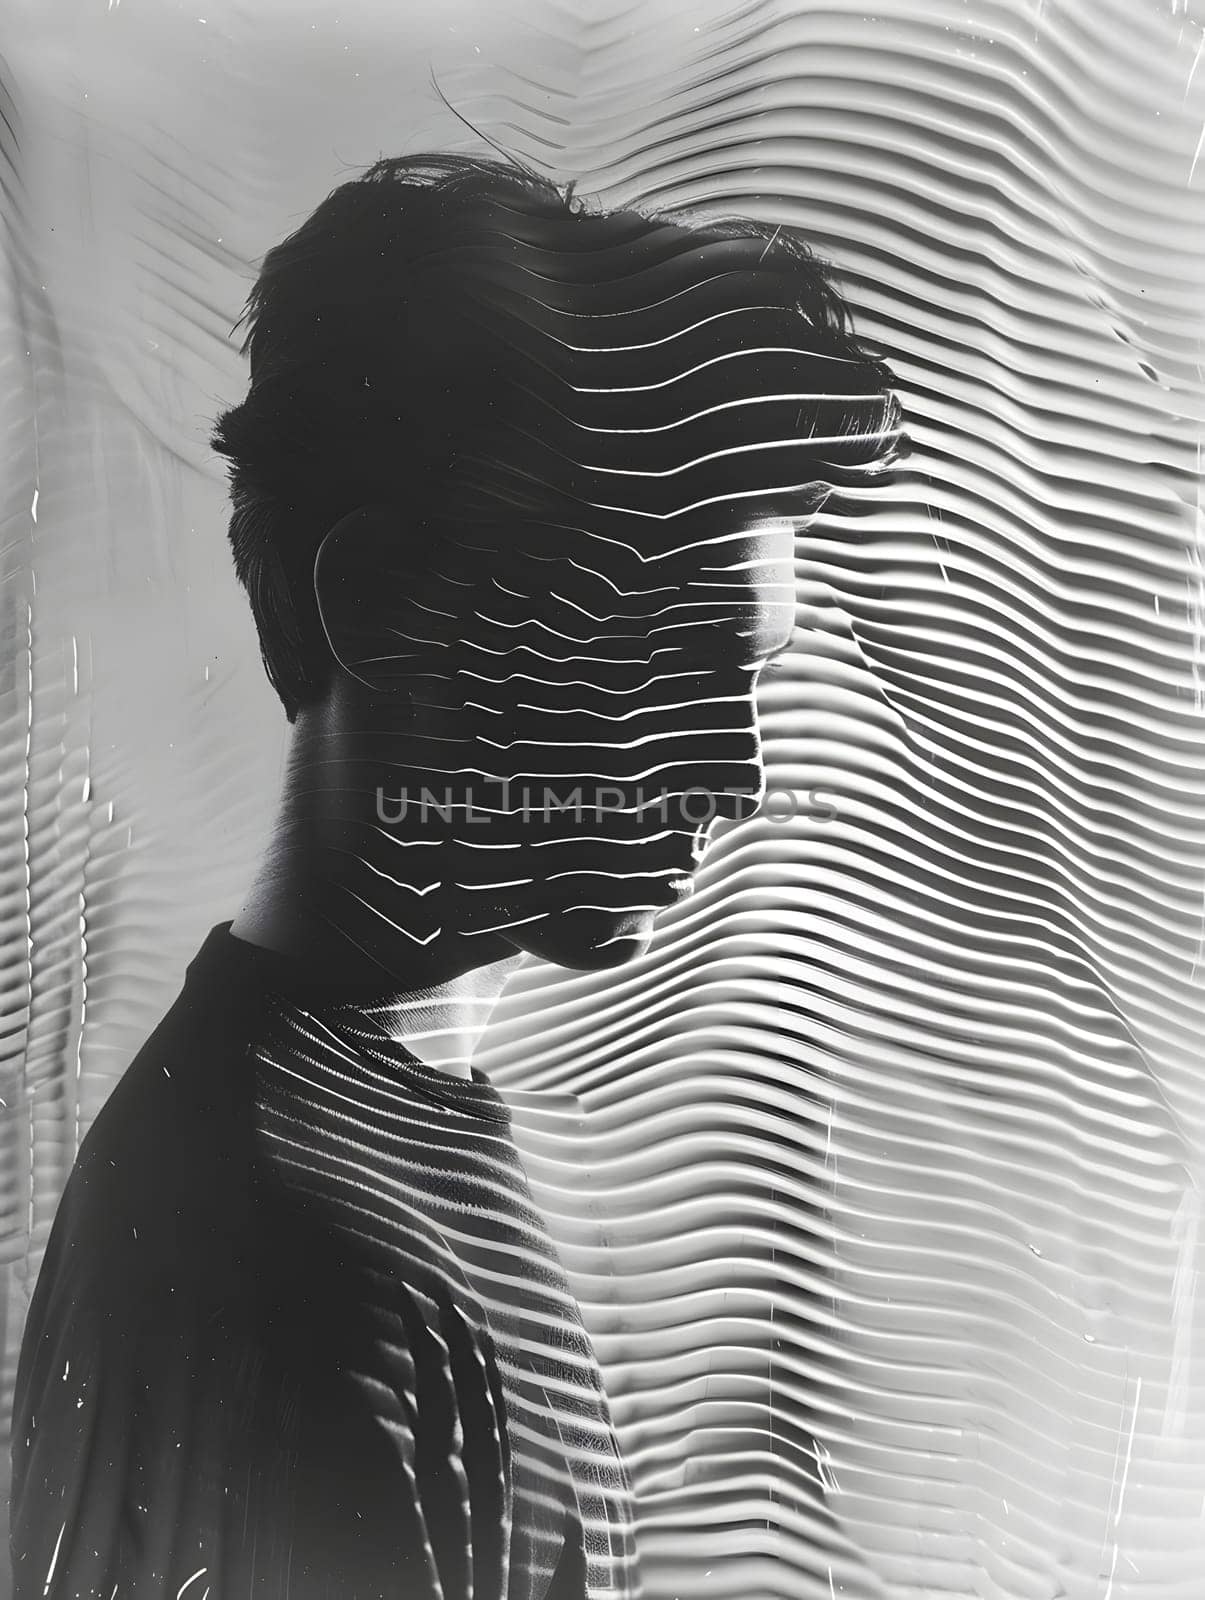 A monochrome photography portrait of a mans face with striking shadows and patterns, focusing on his eye, jaw, and eyelashes. The striped background adds a unique touch to the artistic gesture